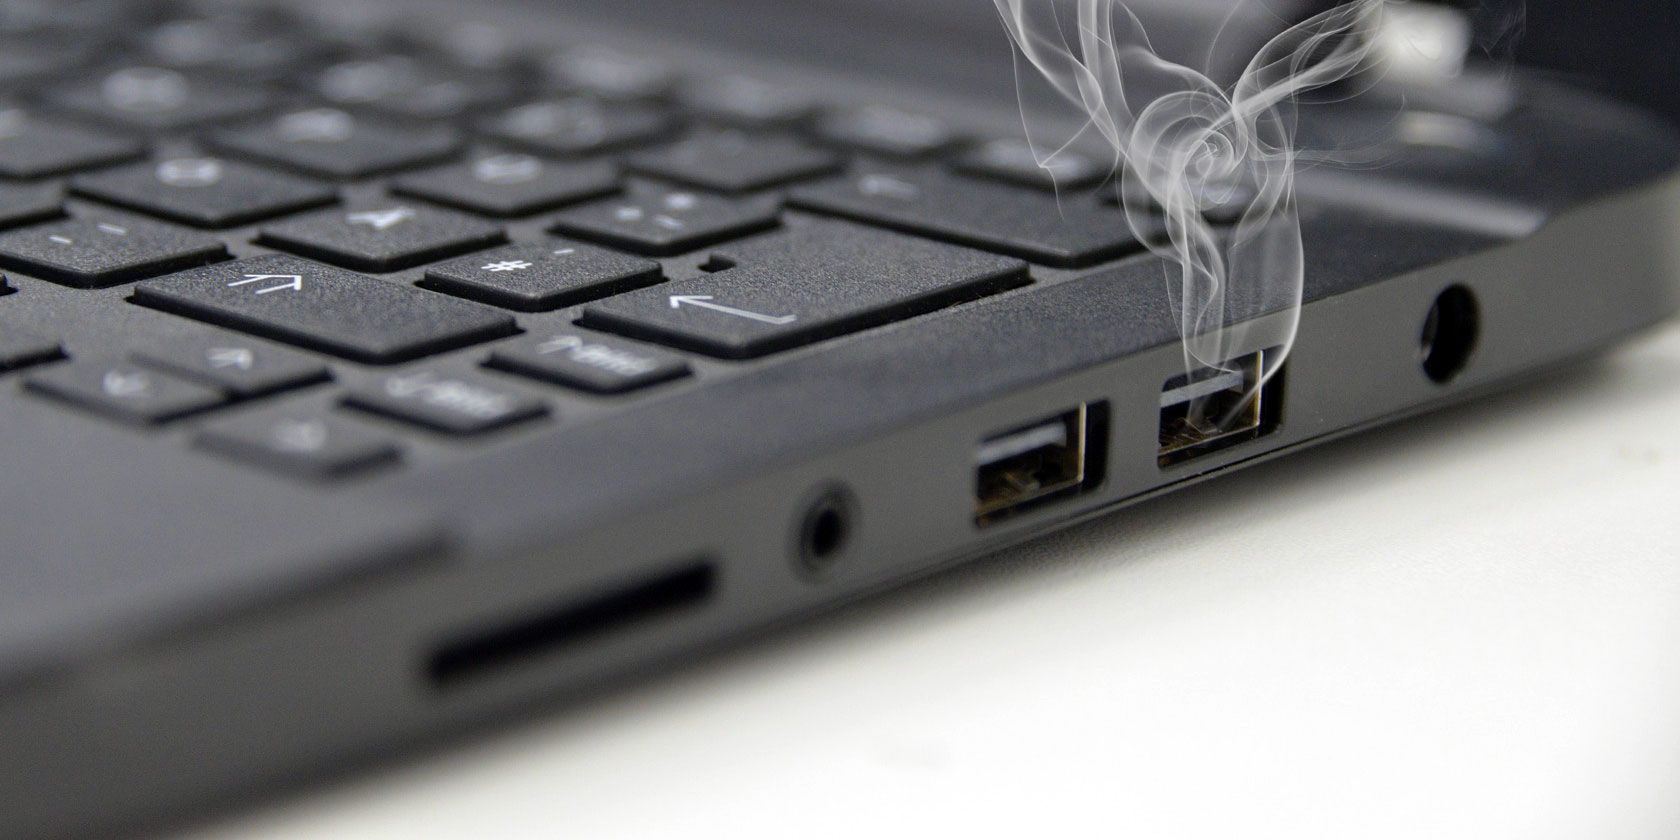 Ensure that the USB port is not damaged or loose.
Try connecting the USB drive to a different USB port on your computer.